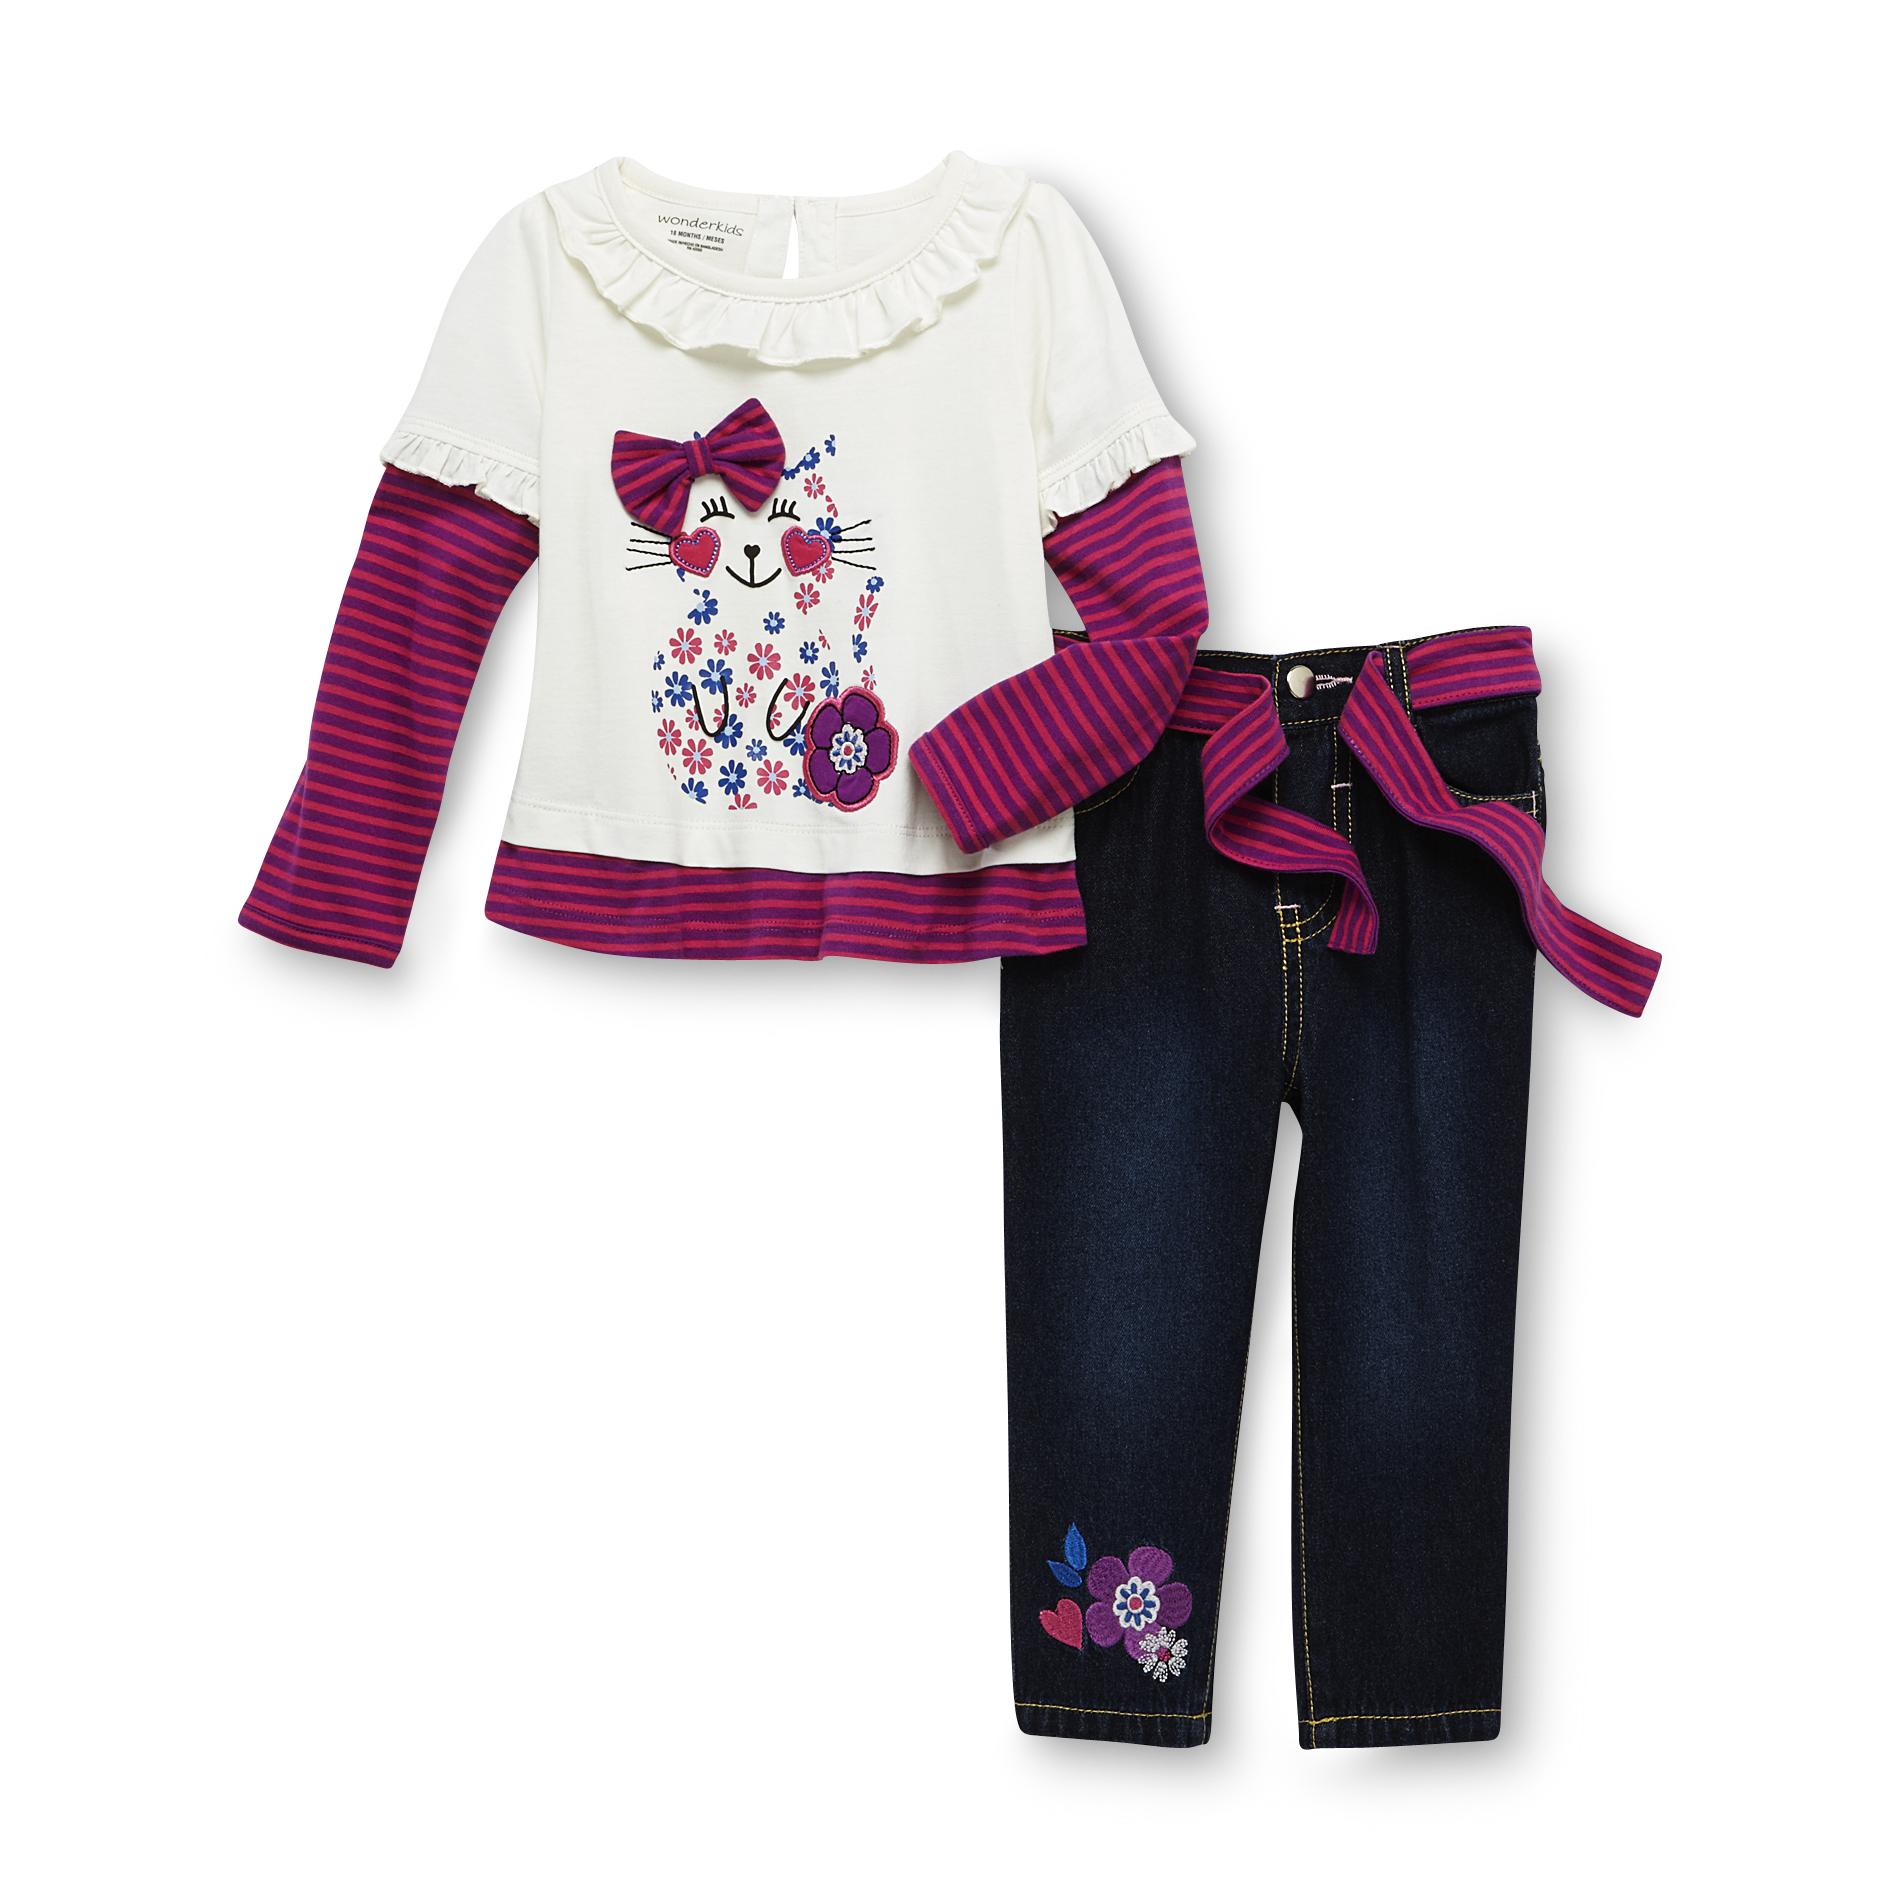 WonderKids Infant Girl's Layered-Look Top  Jeans & Belt - Kitty Cat